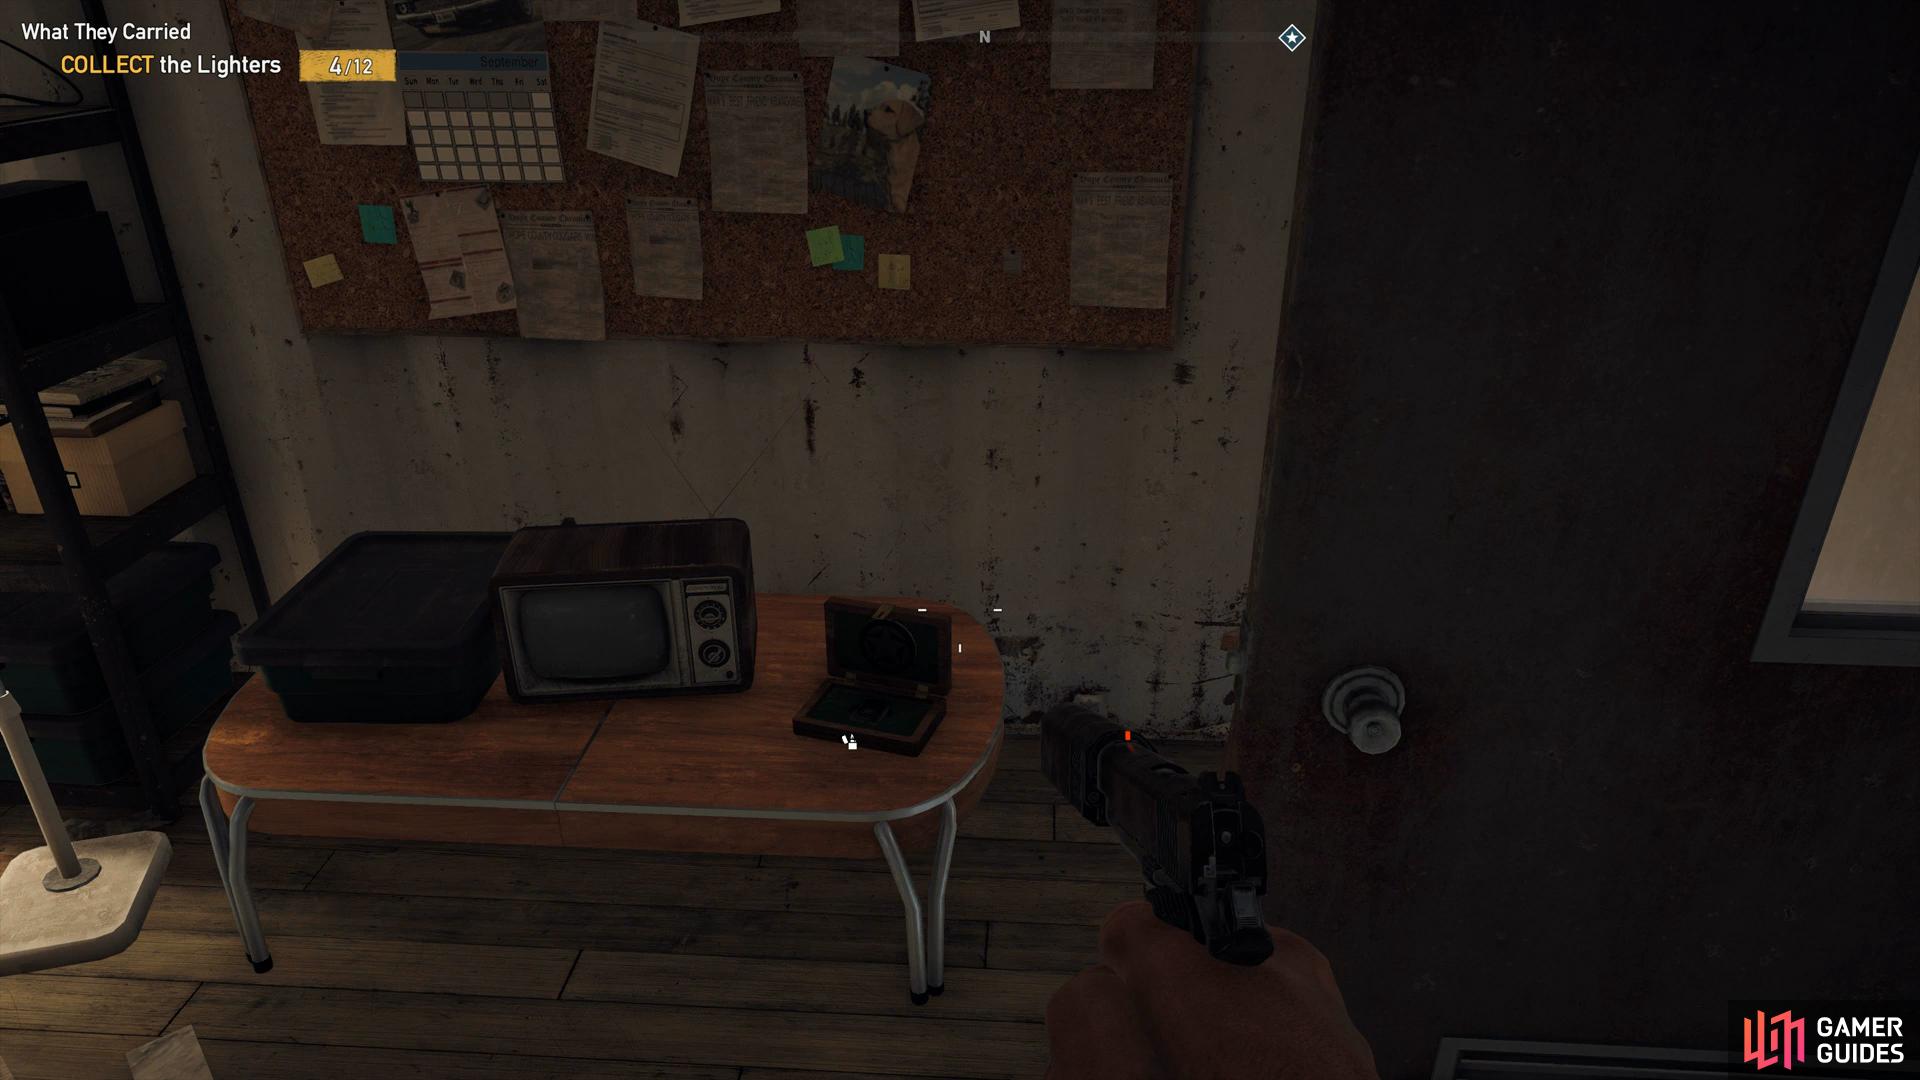 the Lighter can be found on a table at the back of the bunker.